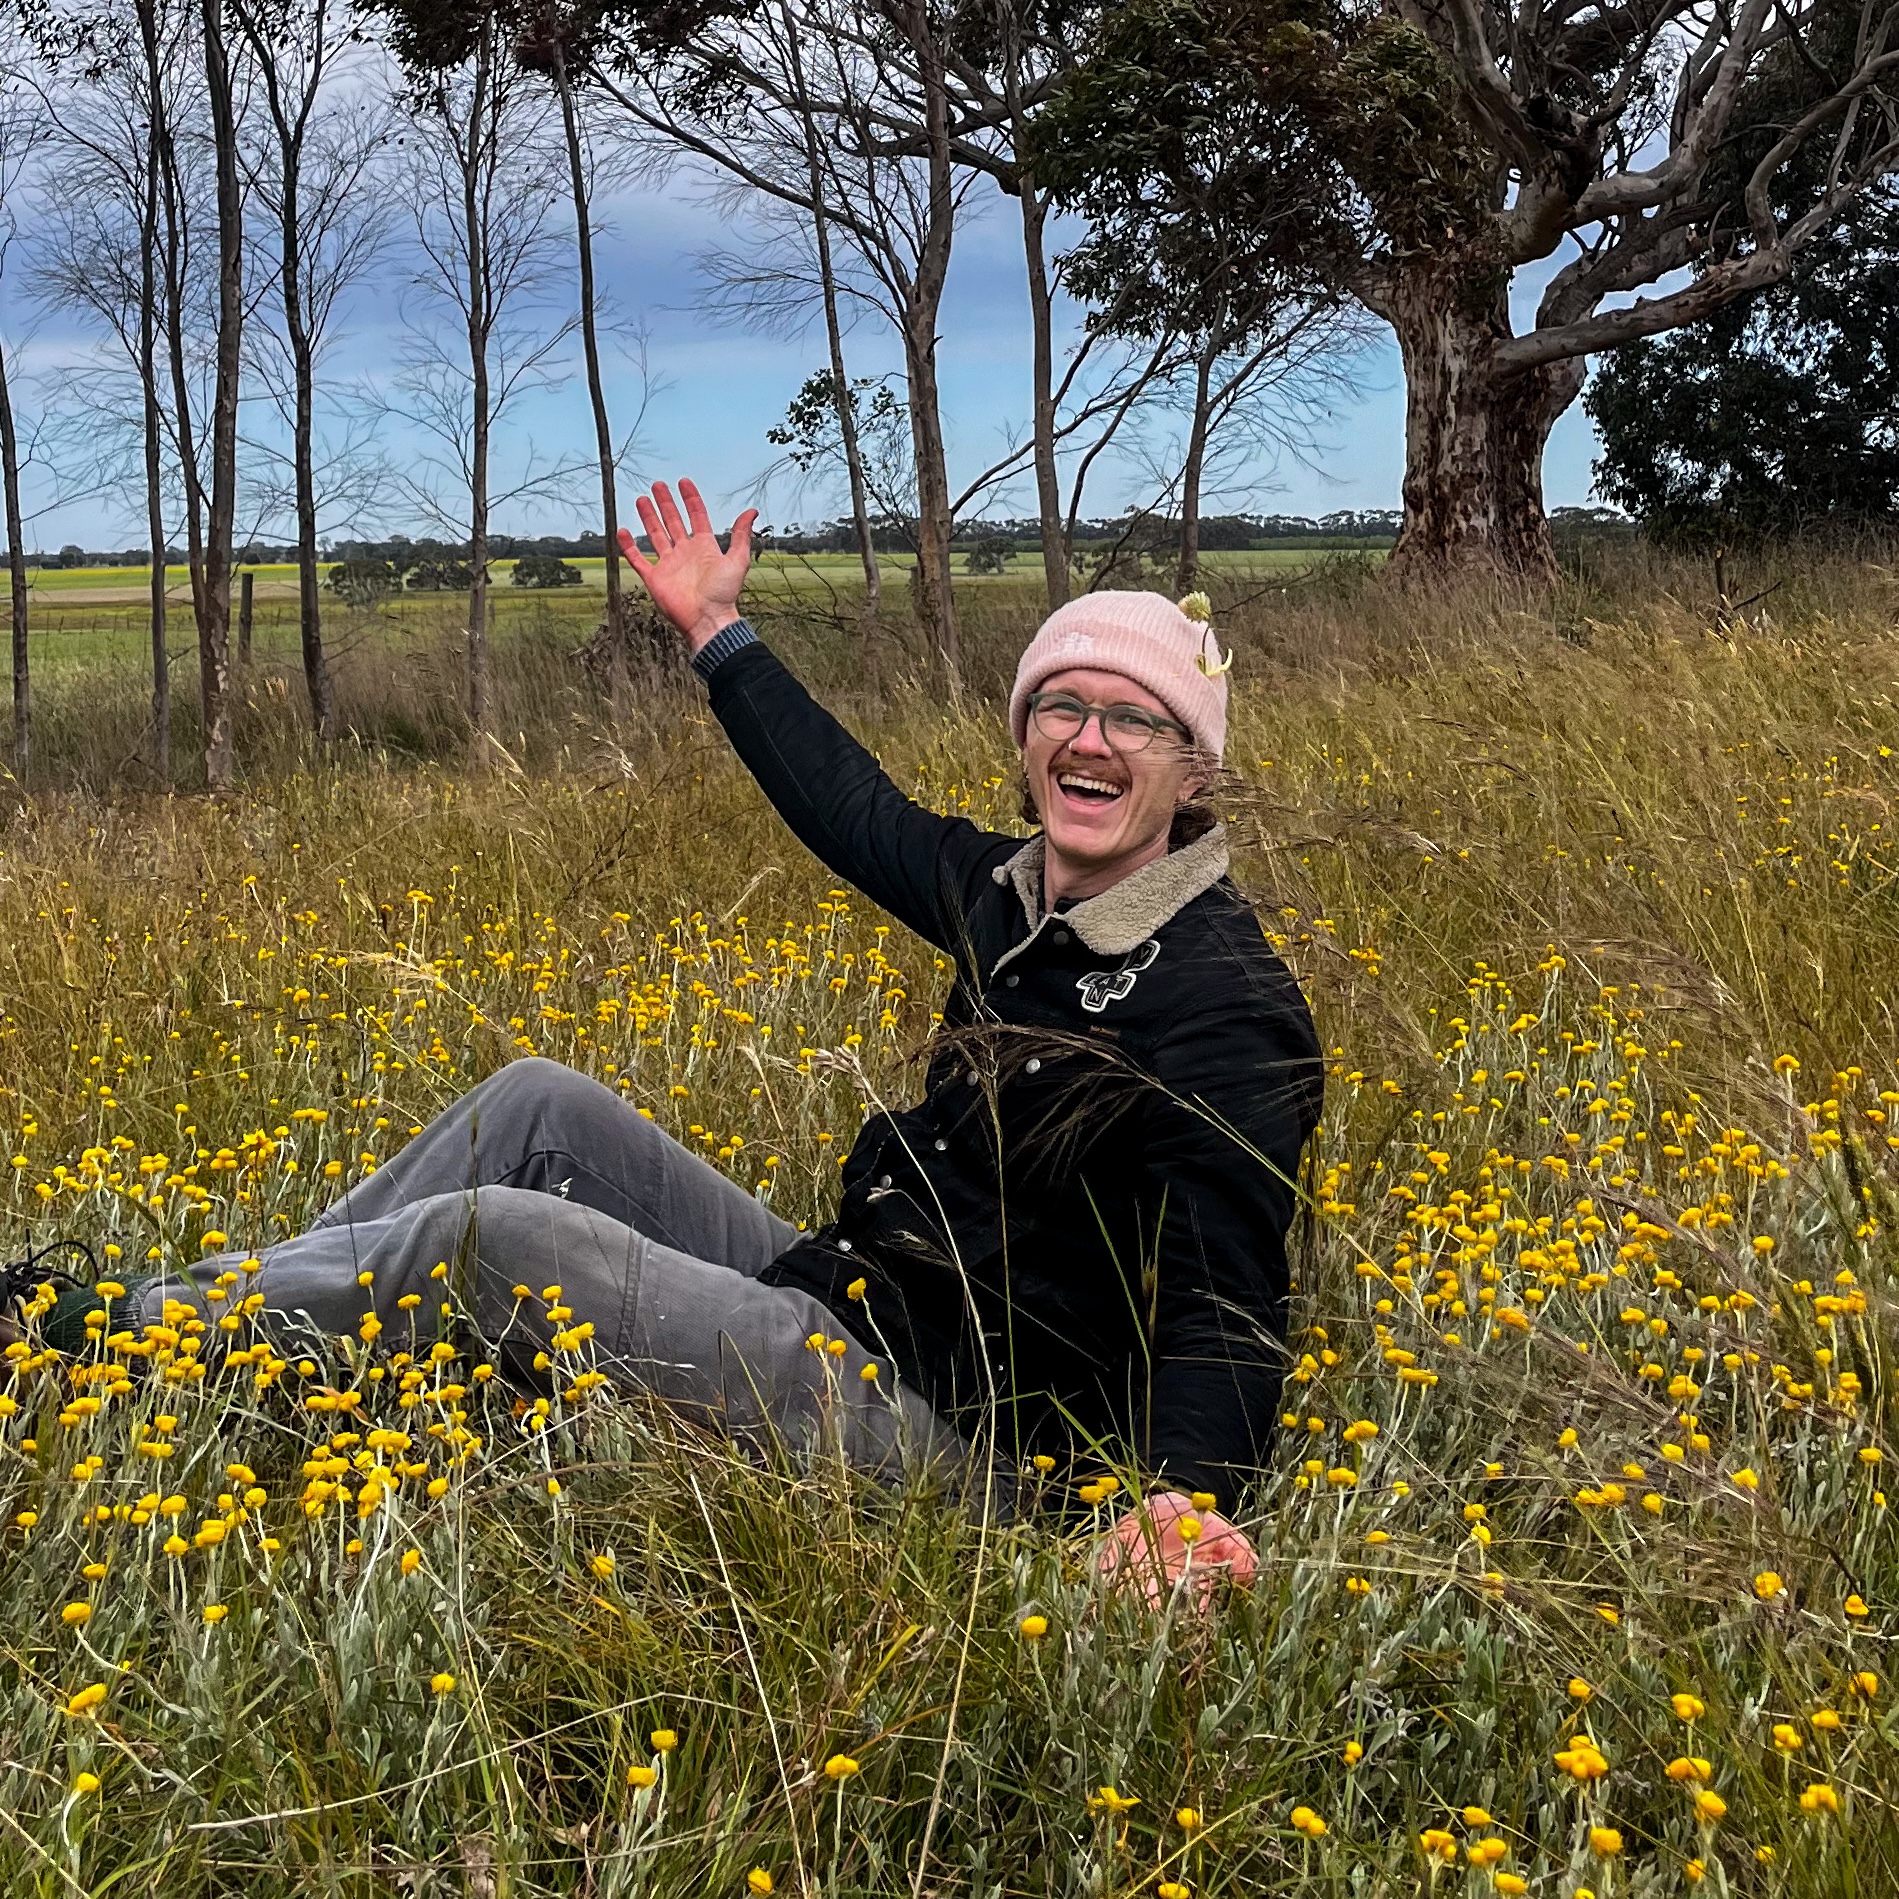 Jake, the campus coordinator in his natural habitat - sitting in a victorian grassland rich in flowers and grasses.